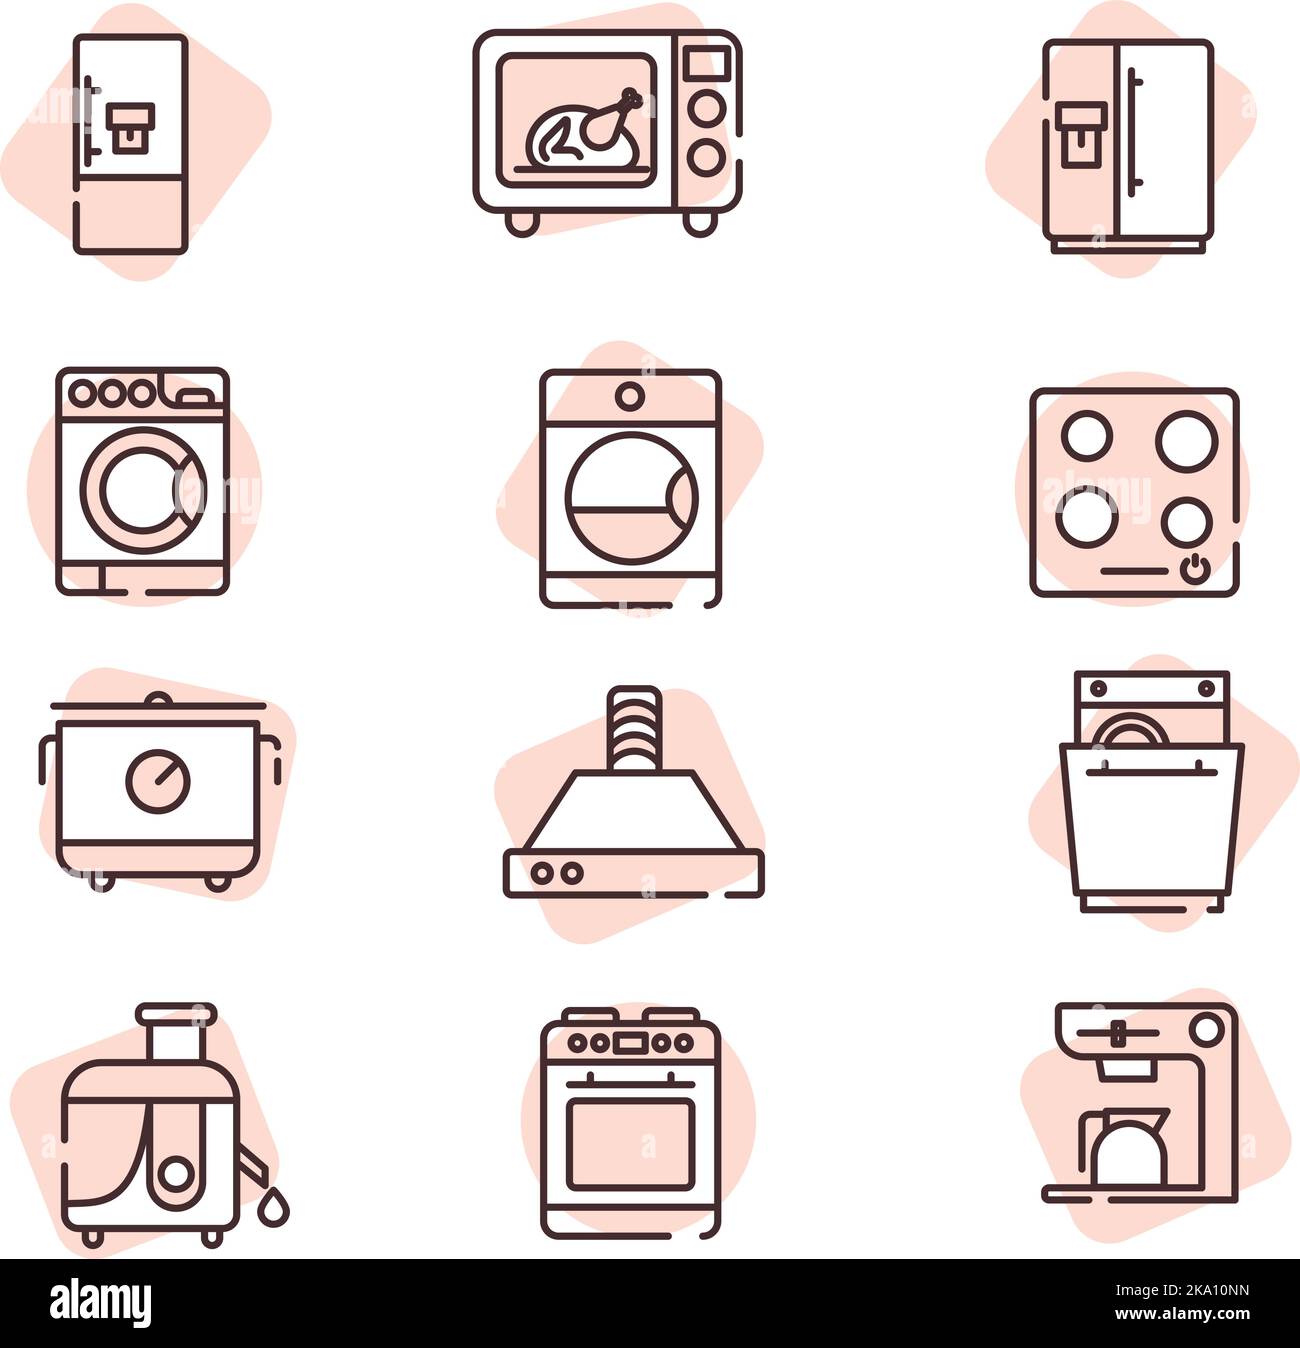 Home supplies icon set, illustration or icon, vector on white background. Stock Vector